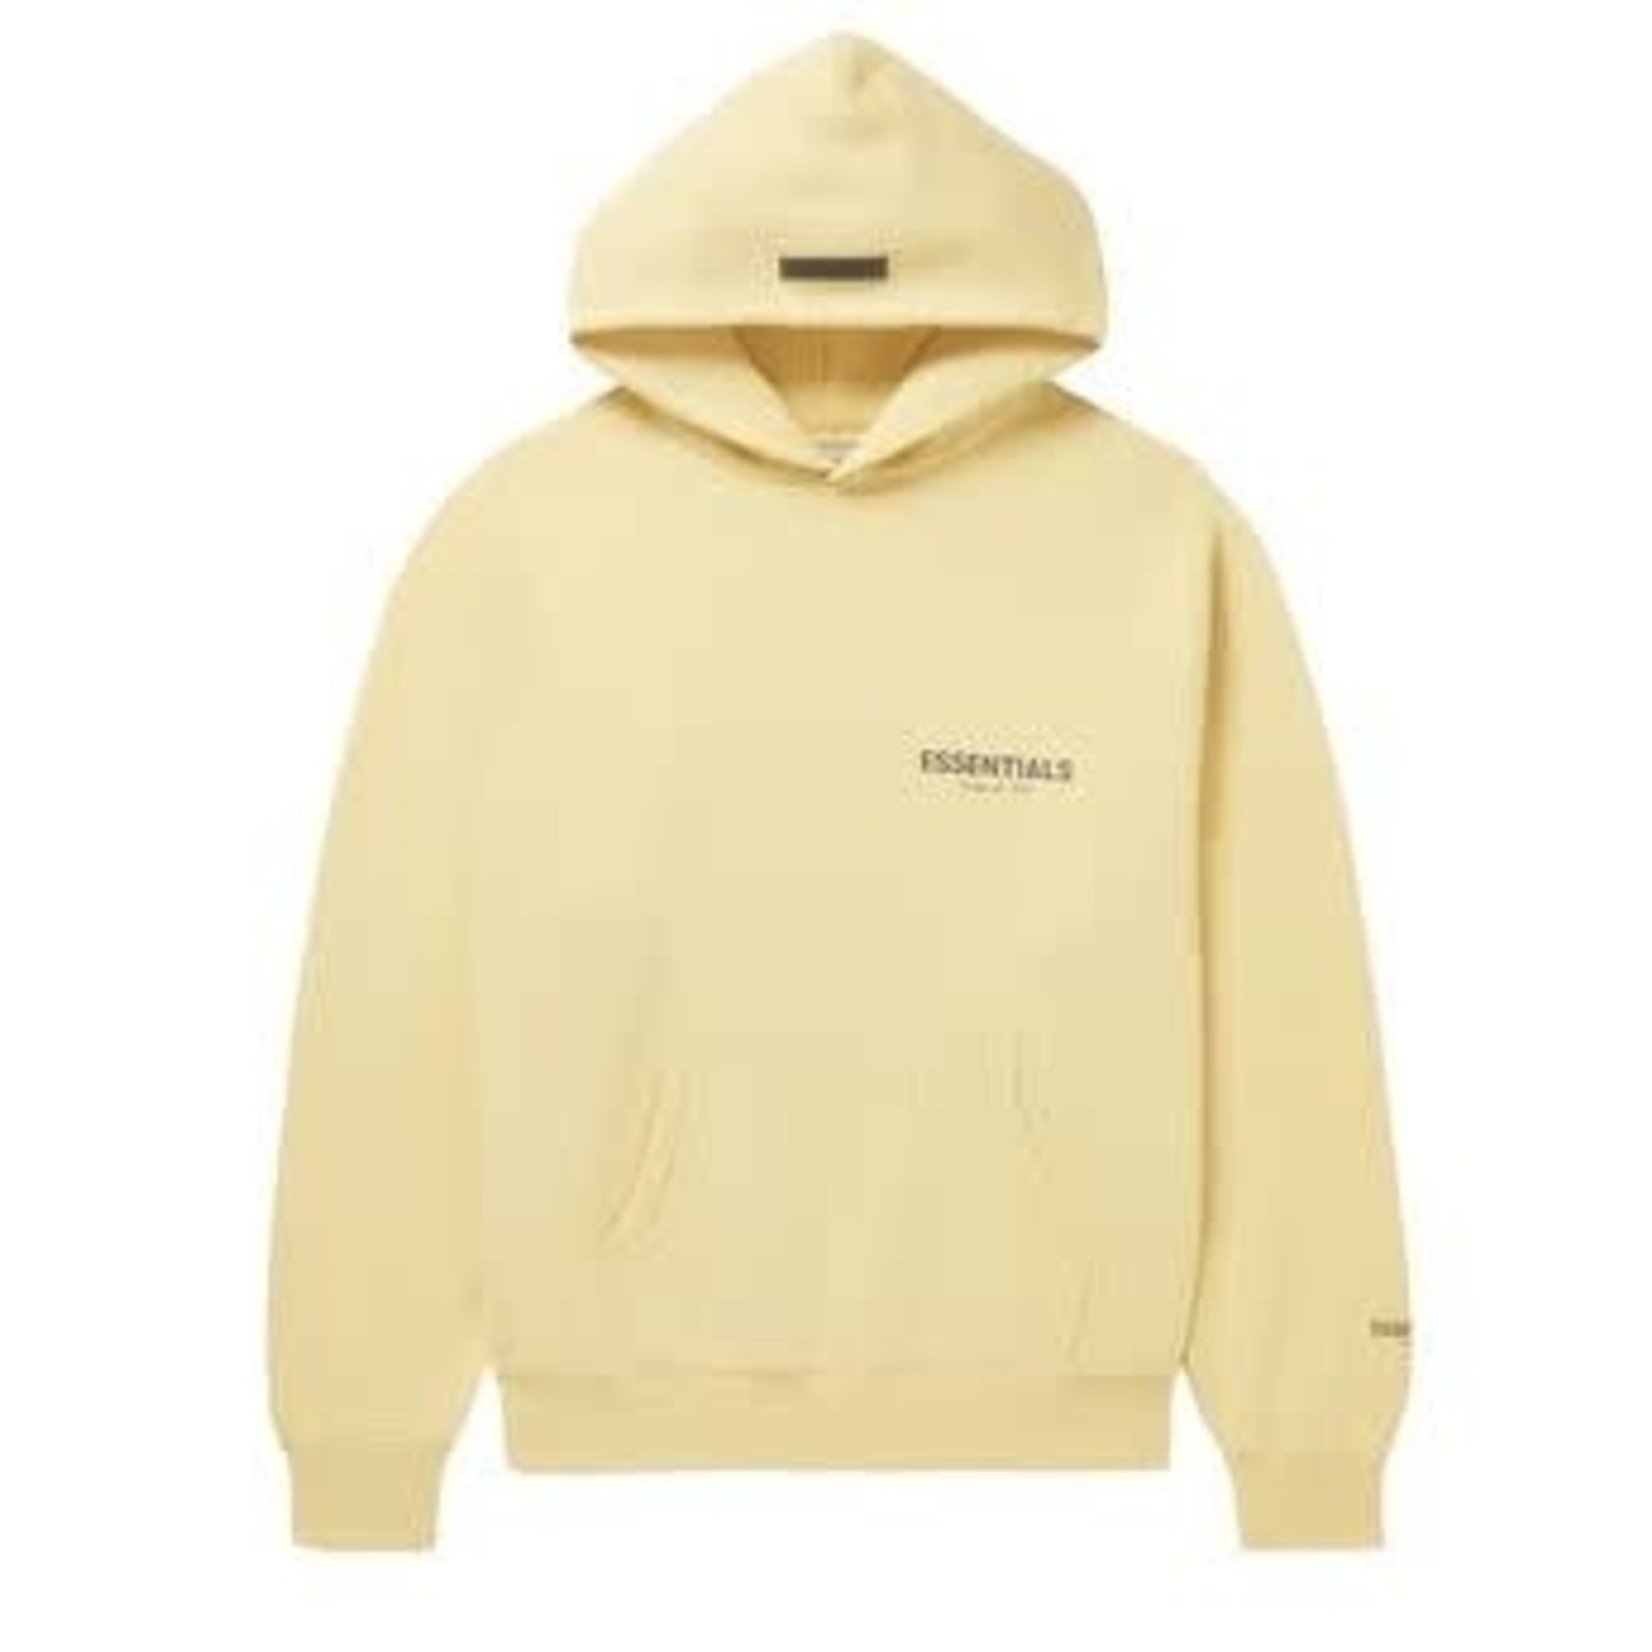 Fear Fear of God Essentials Mr. Porter Exclusive Logo-Print Cotton-Blend Jersey Hoodie Cream Size XSmall, DS BRAND NEW